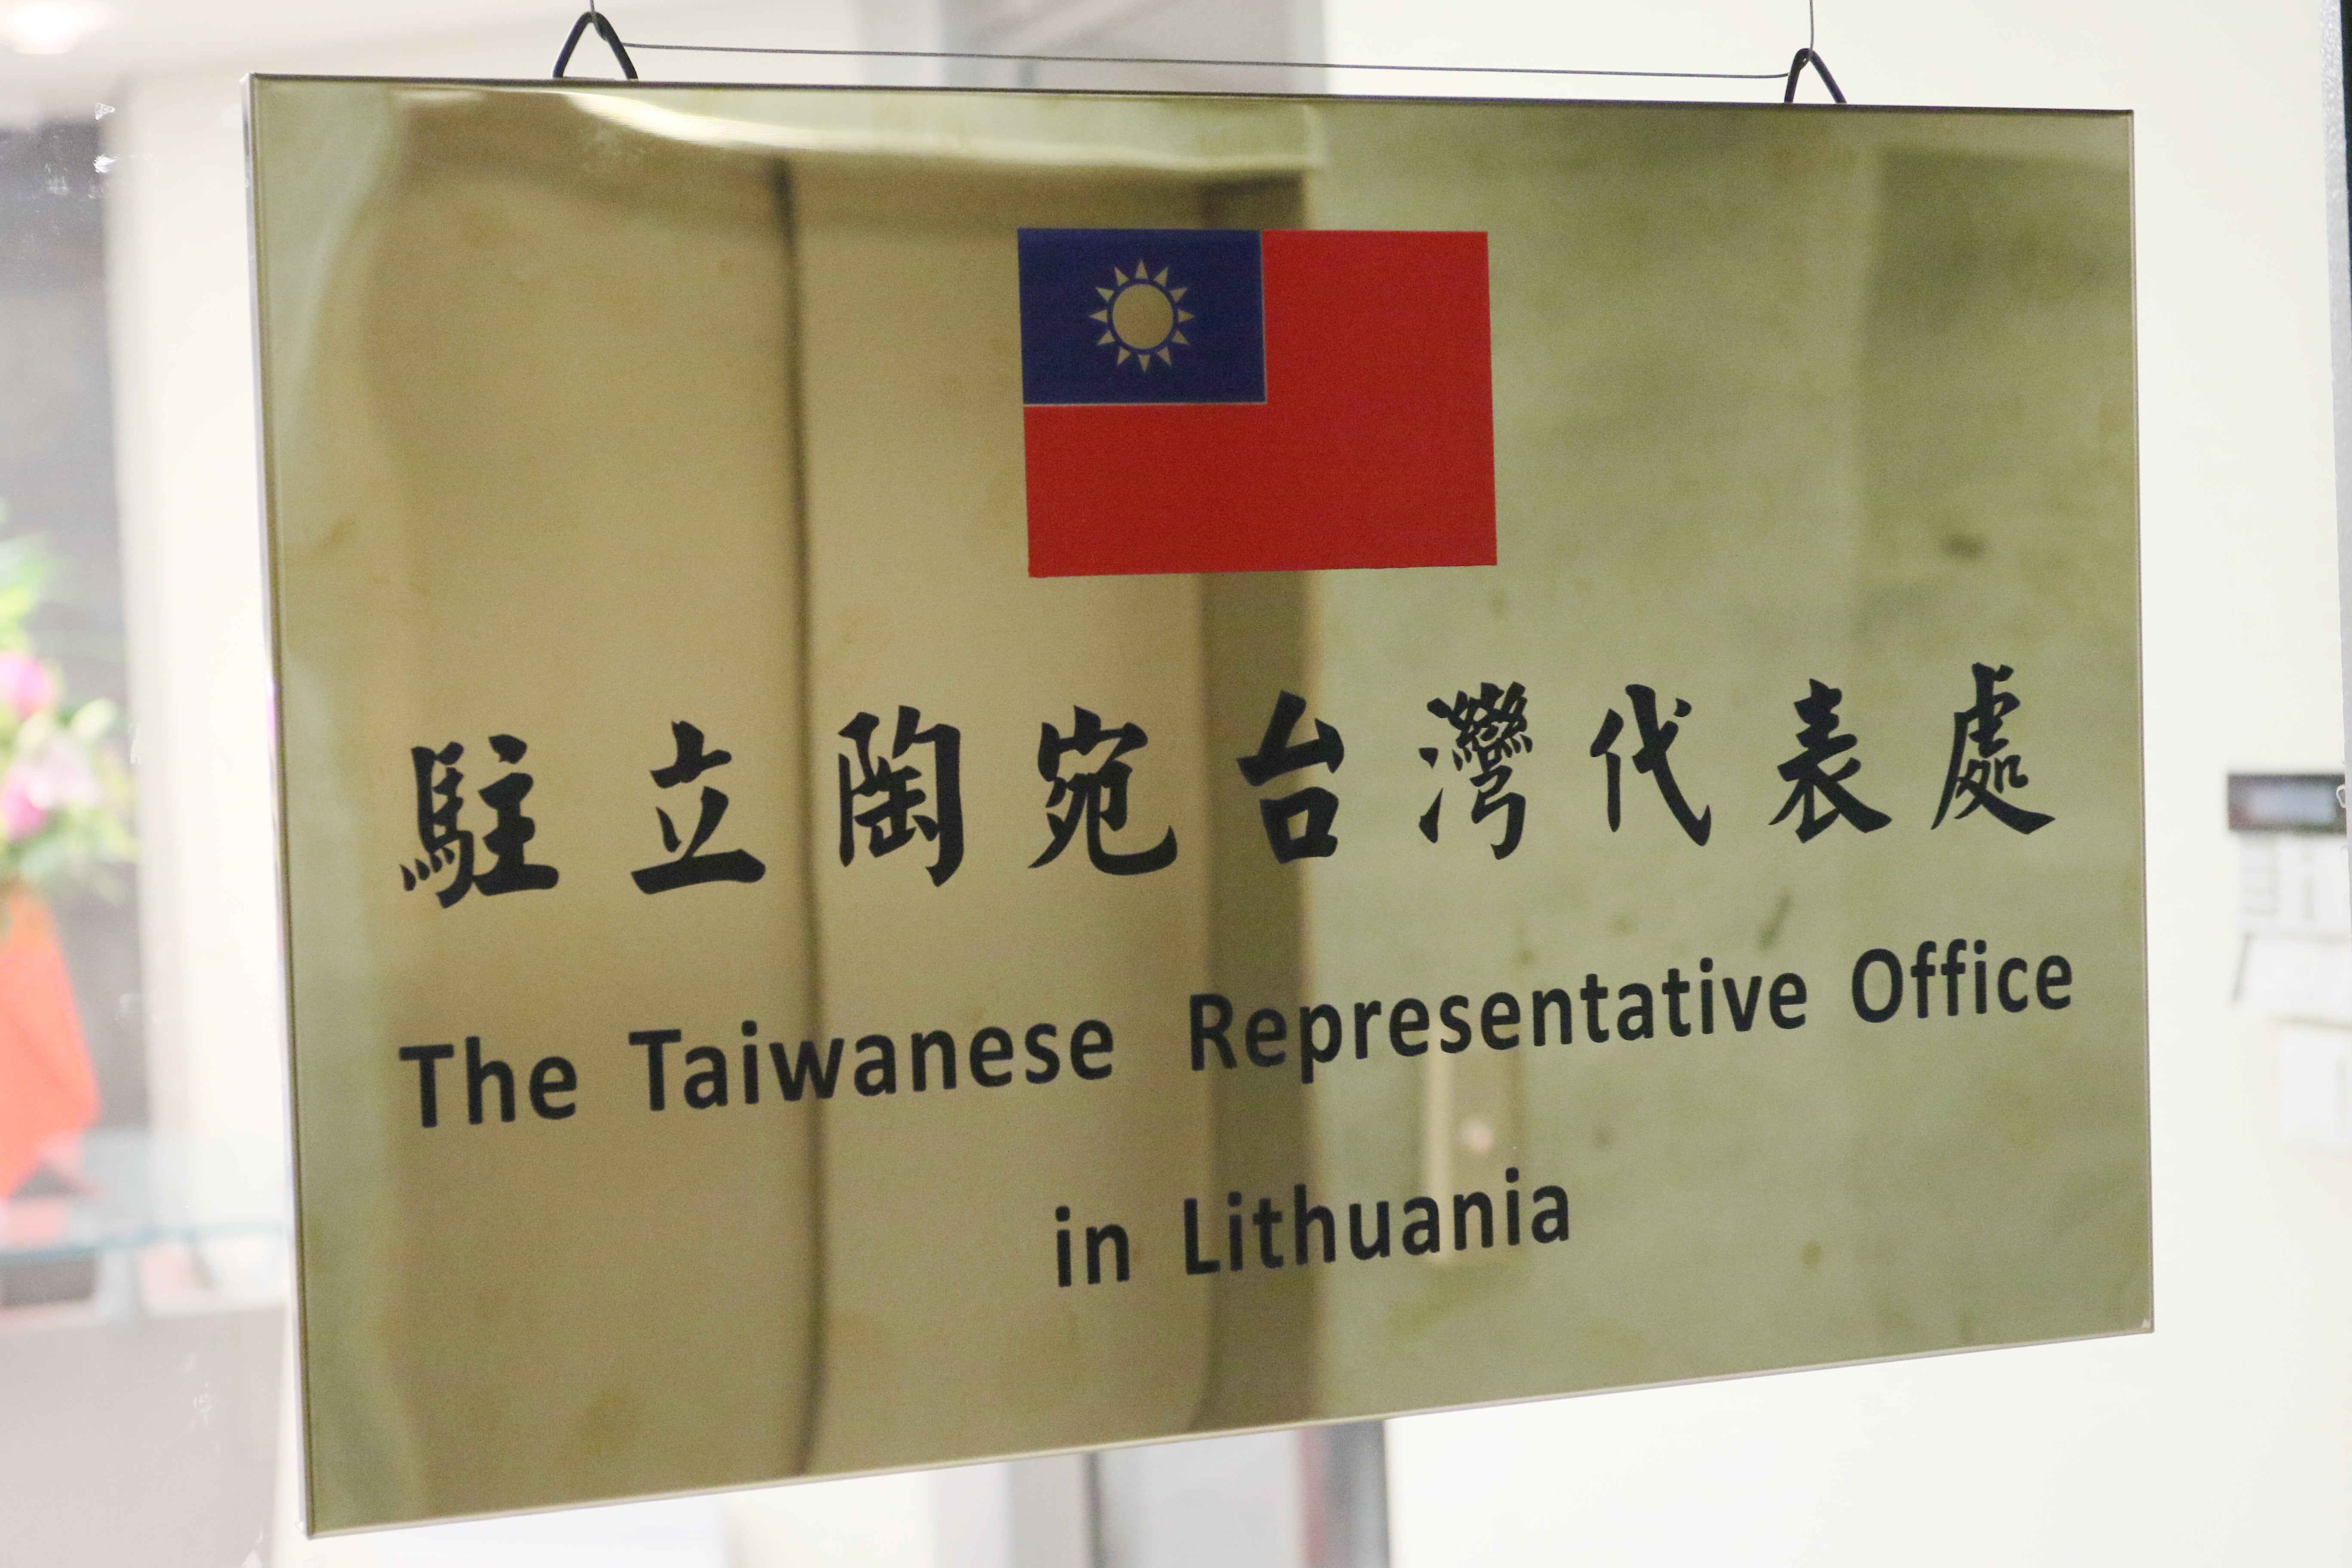 File photo: A plaque at the Taiwanese Representative Office in Vilnius, Lithuania, 18 November 2021